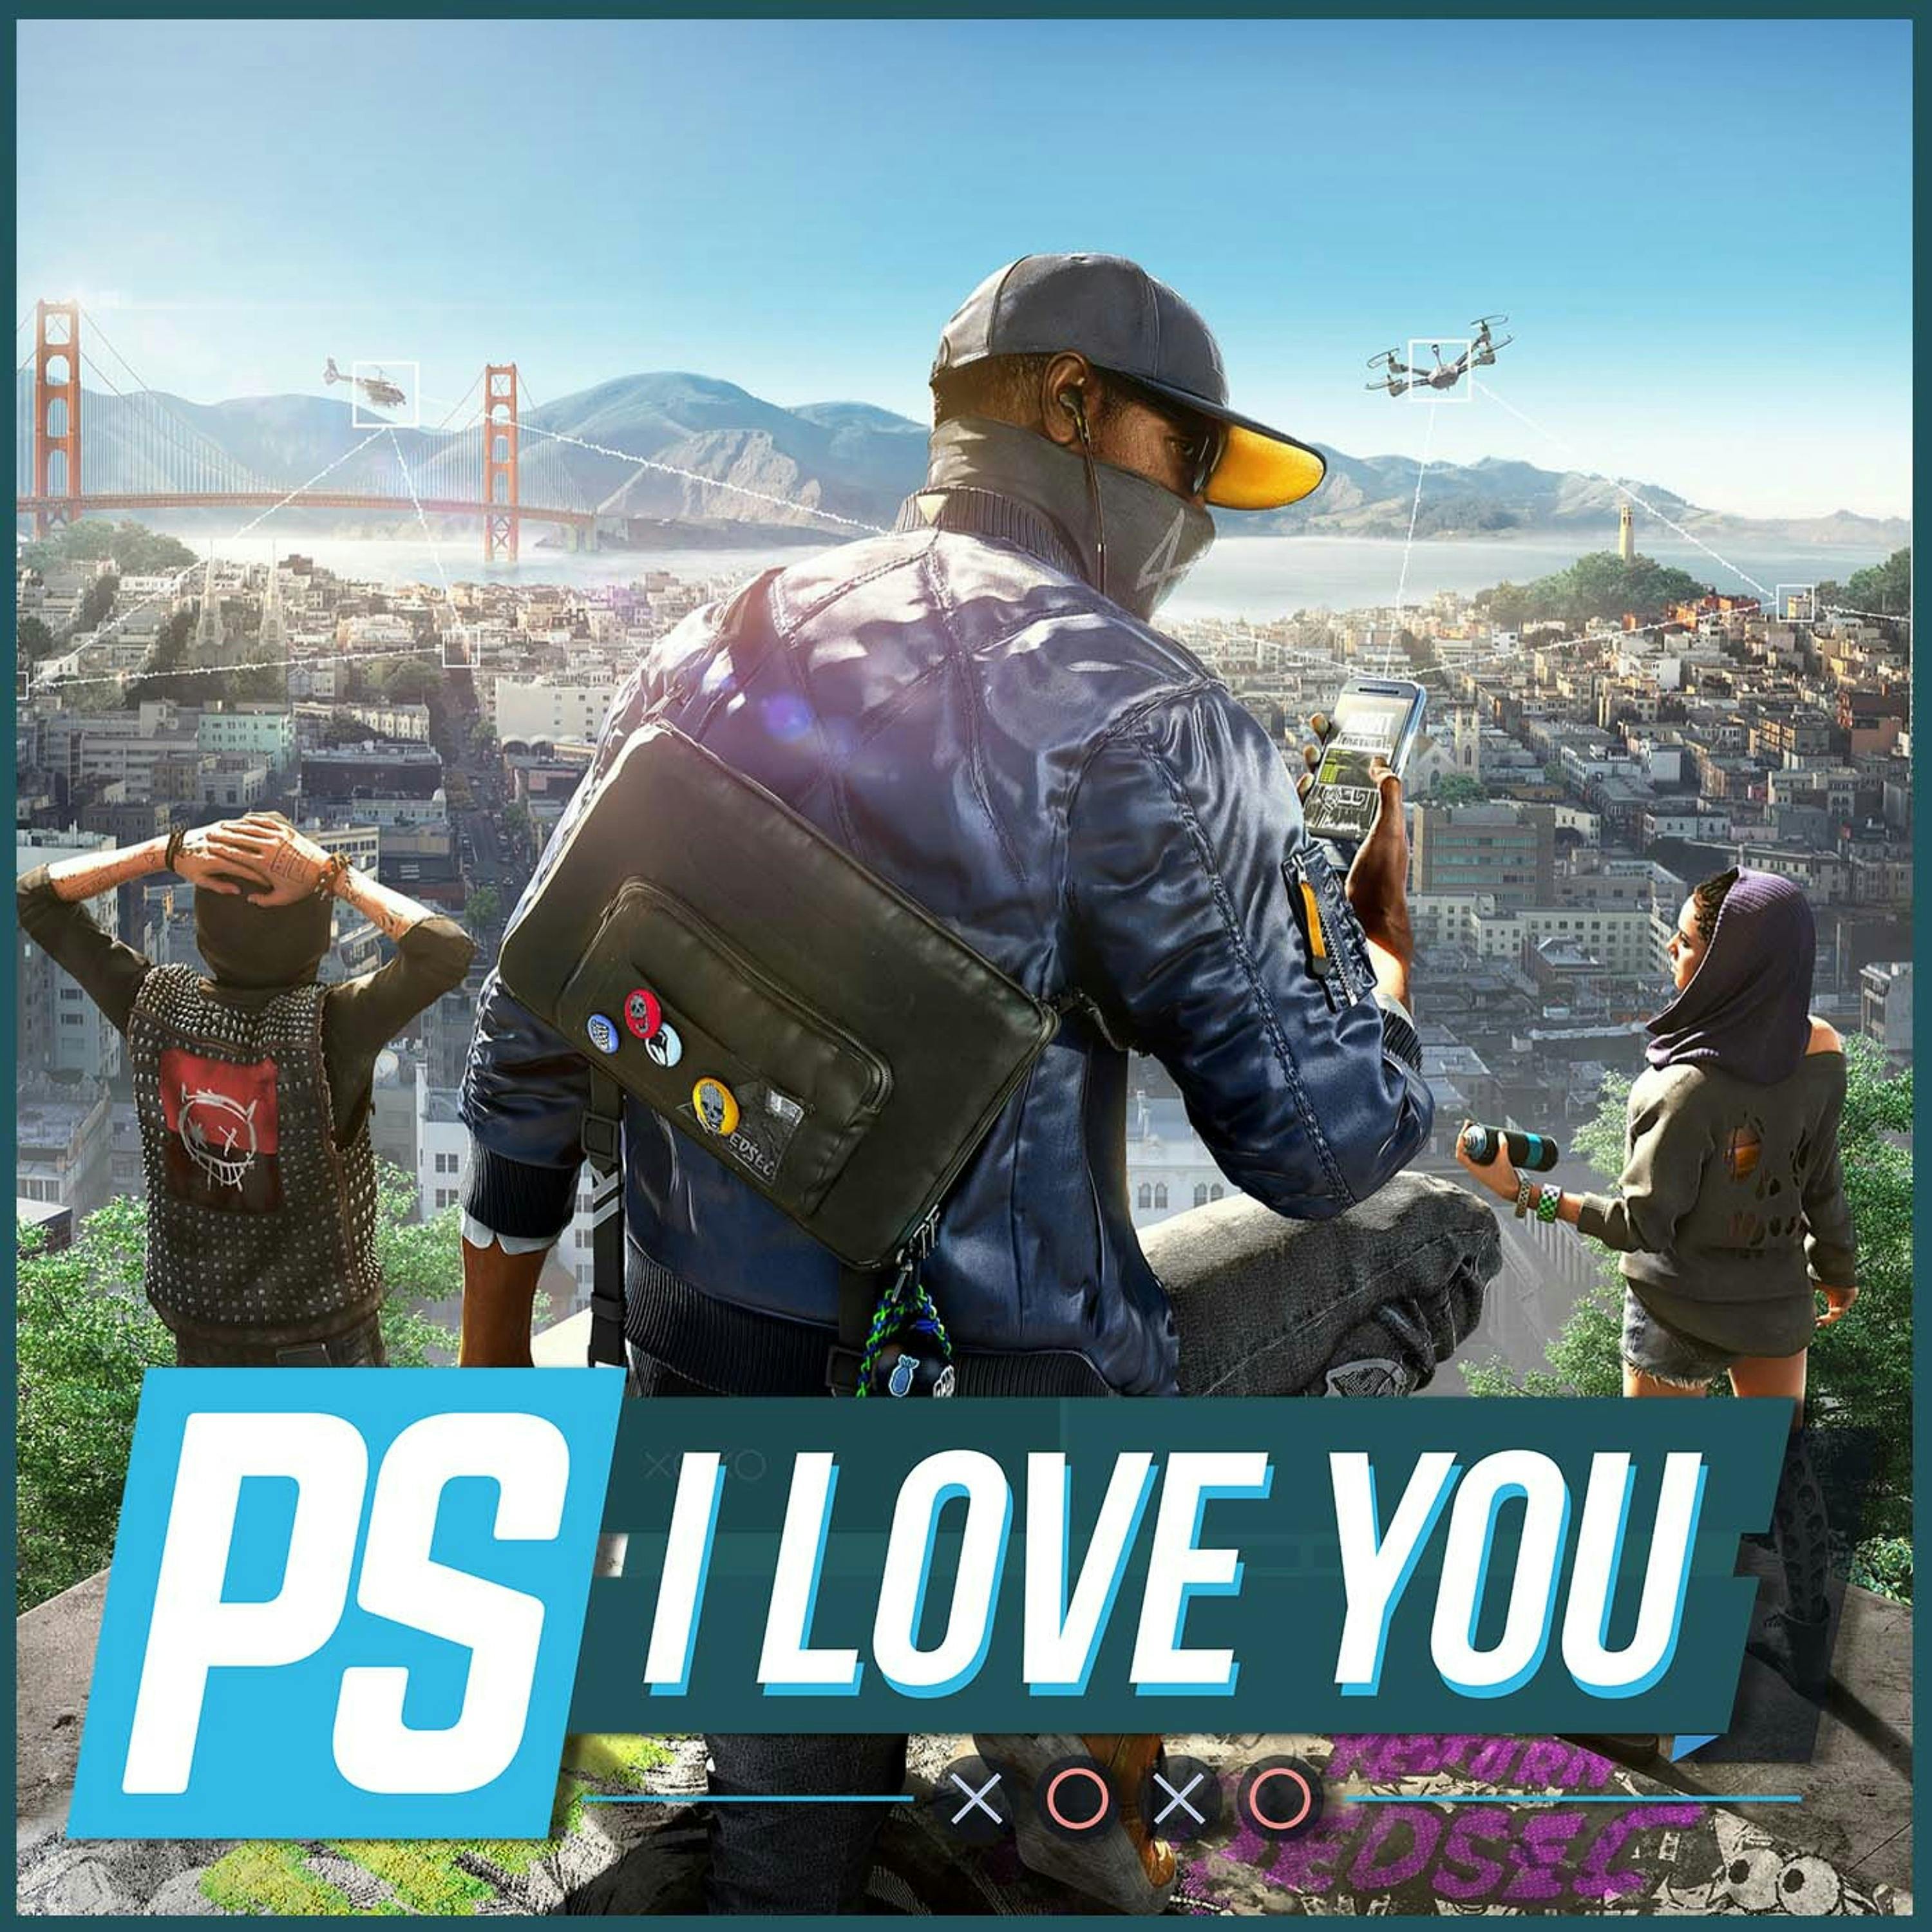 Can Video Games Be Fun Without Killing? - PS I Love You XOXO Ep. 61